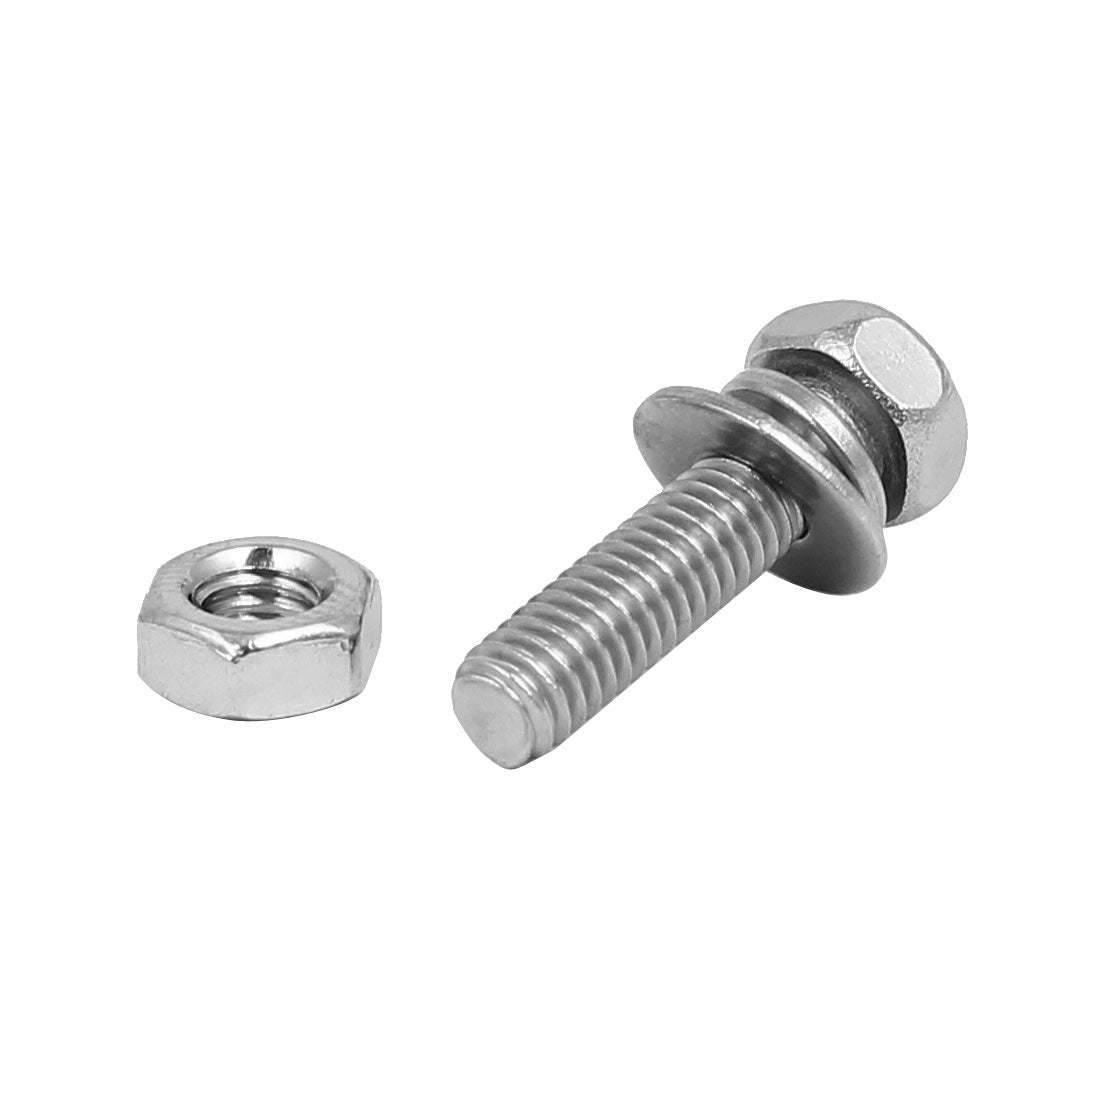 uxcell Uxcell M4 x 16mm 304 Stainless Steel Phillips Hex Head Bolts Nuts w Washers 30 Sets